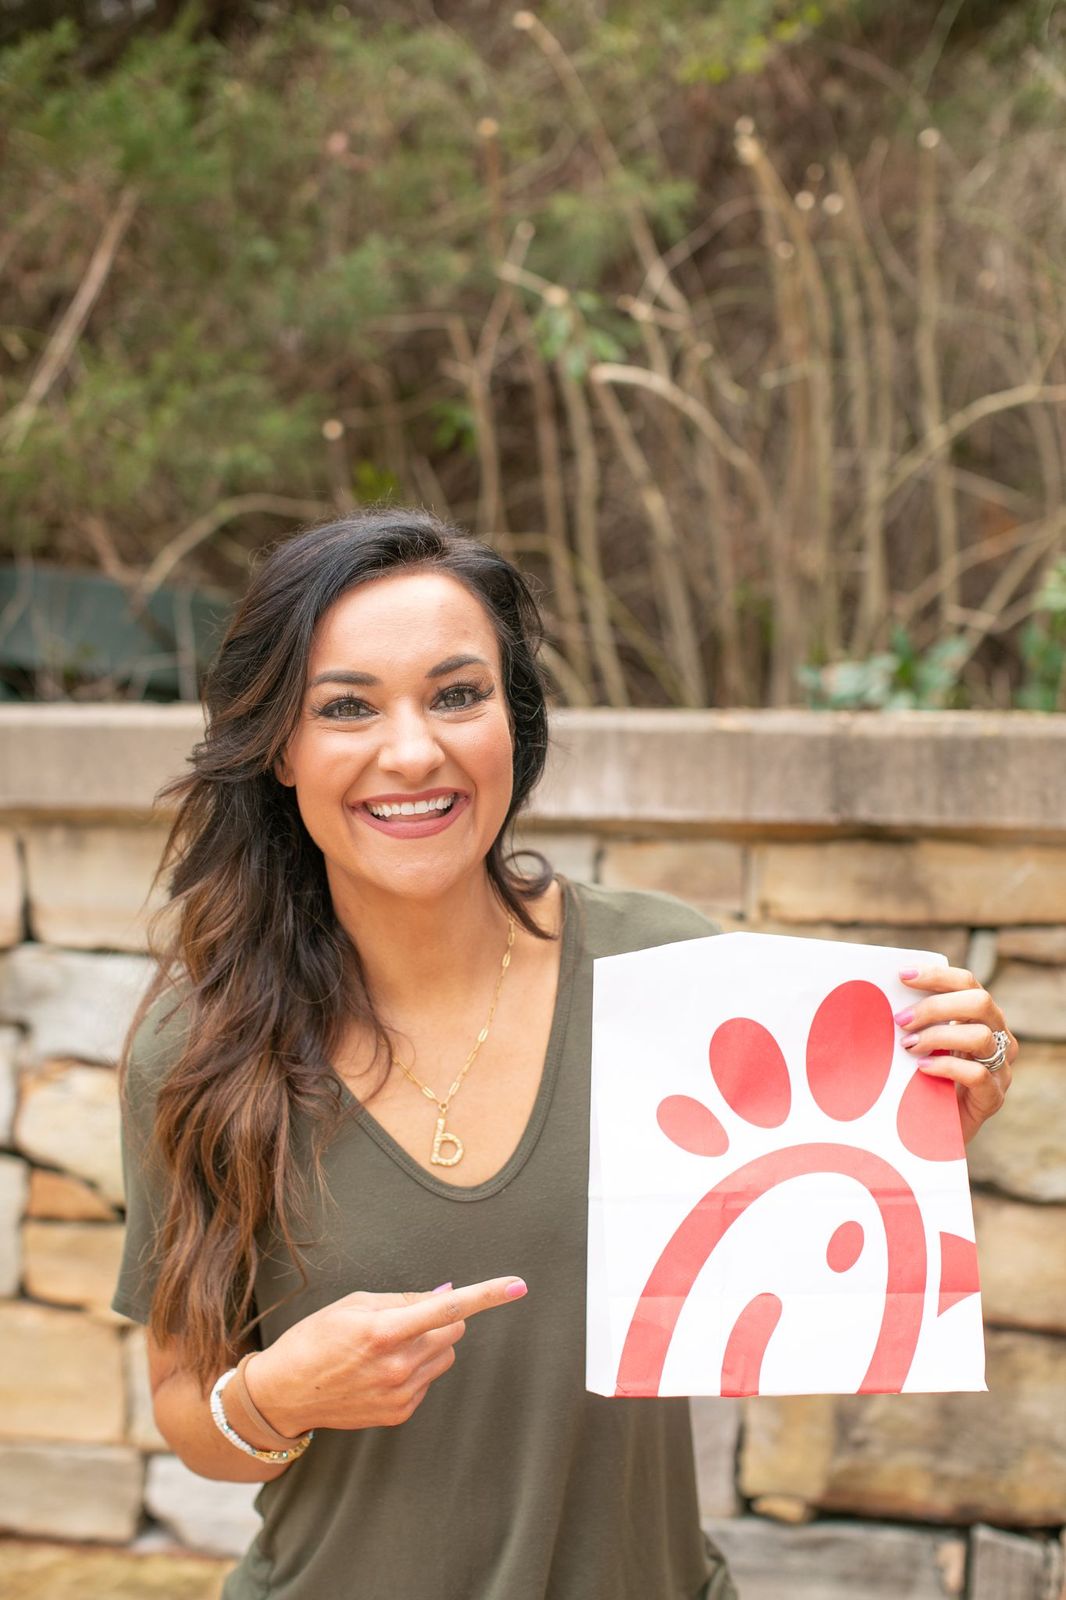 Healthy Chick-Fil-A Meals For The Mom On The Go by Alabama Family + Healthy Living blogger, Heather Brown // My Life Well Loved